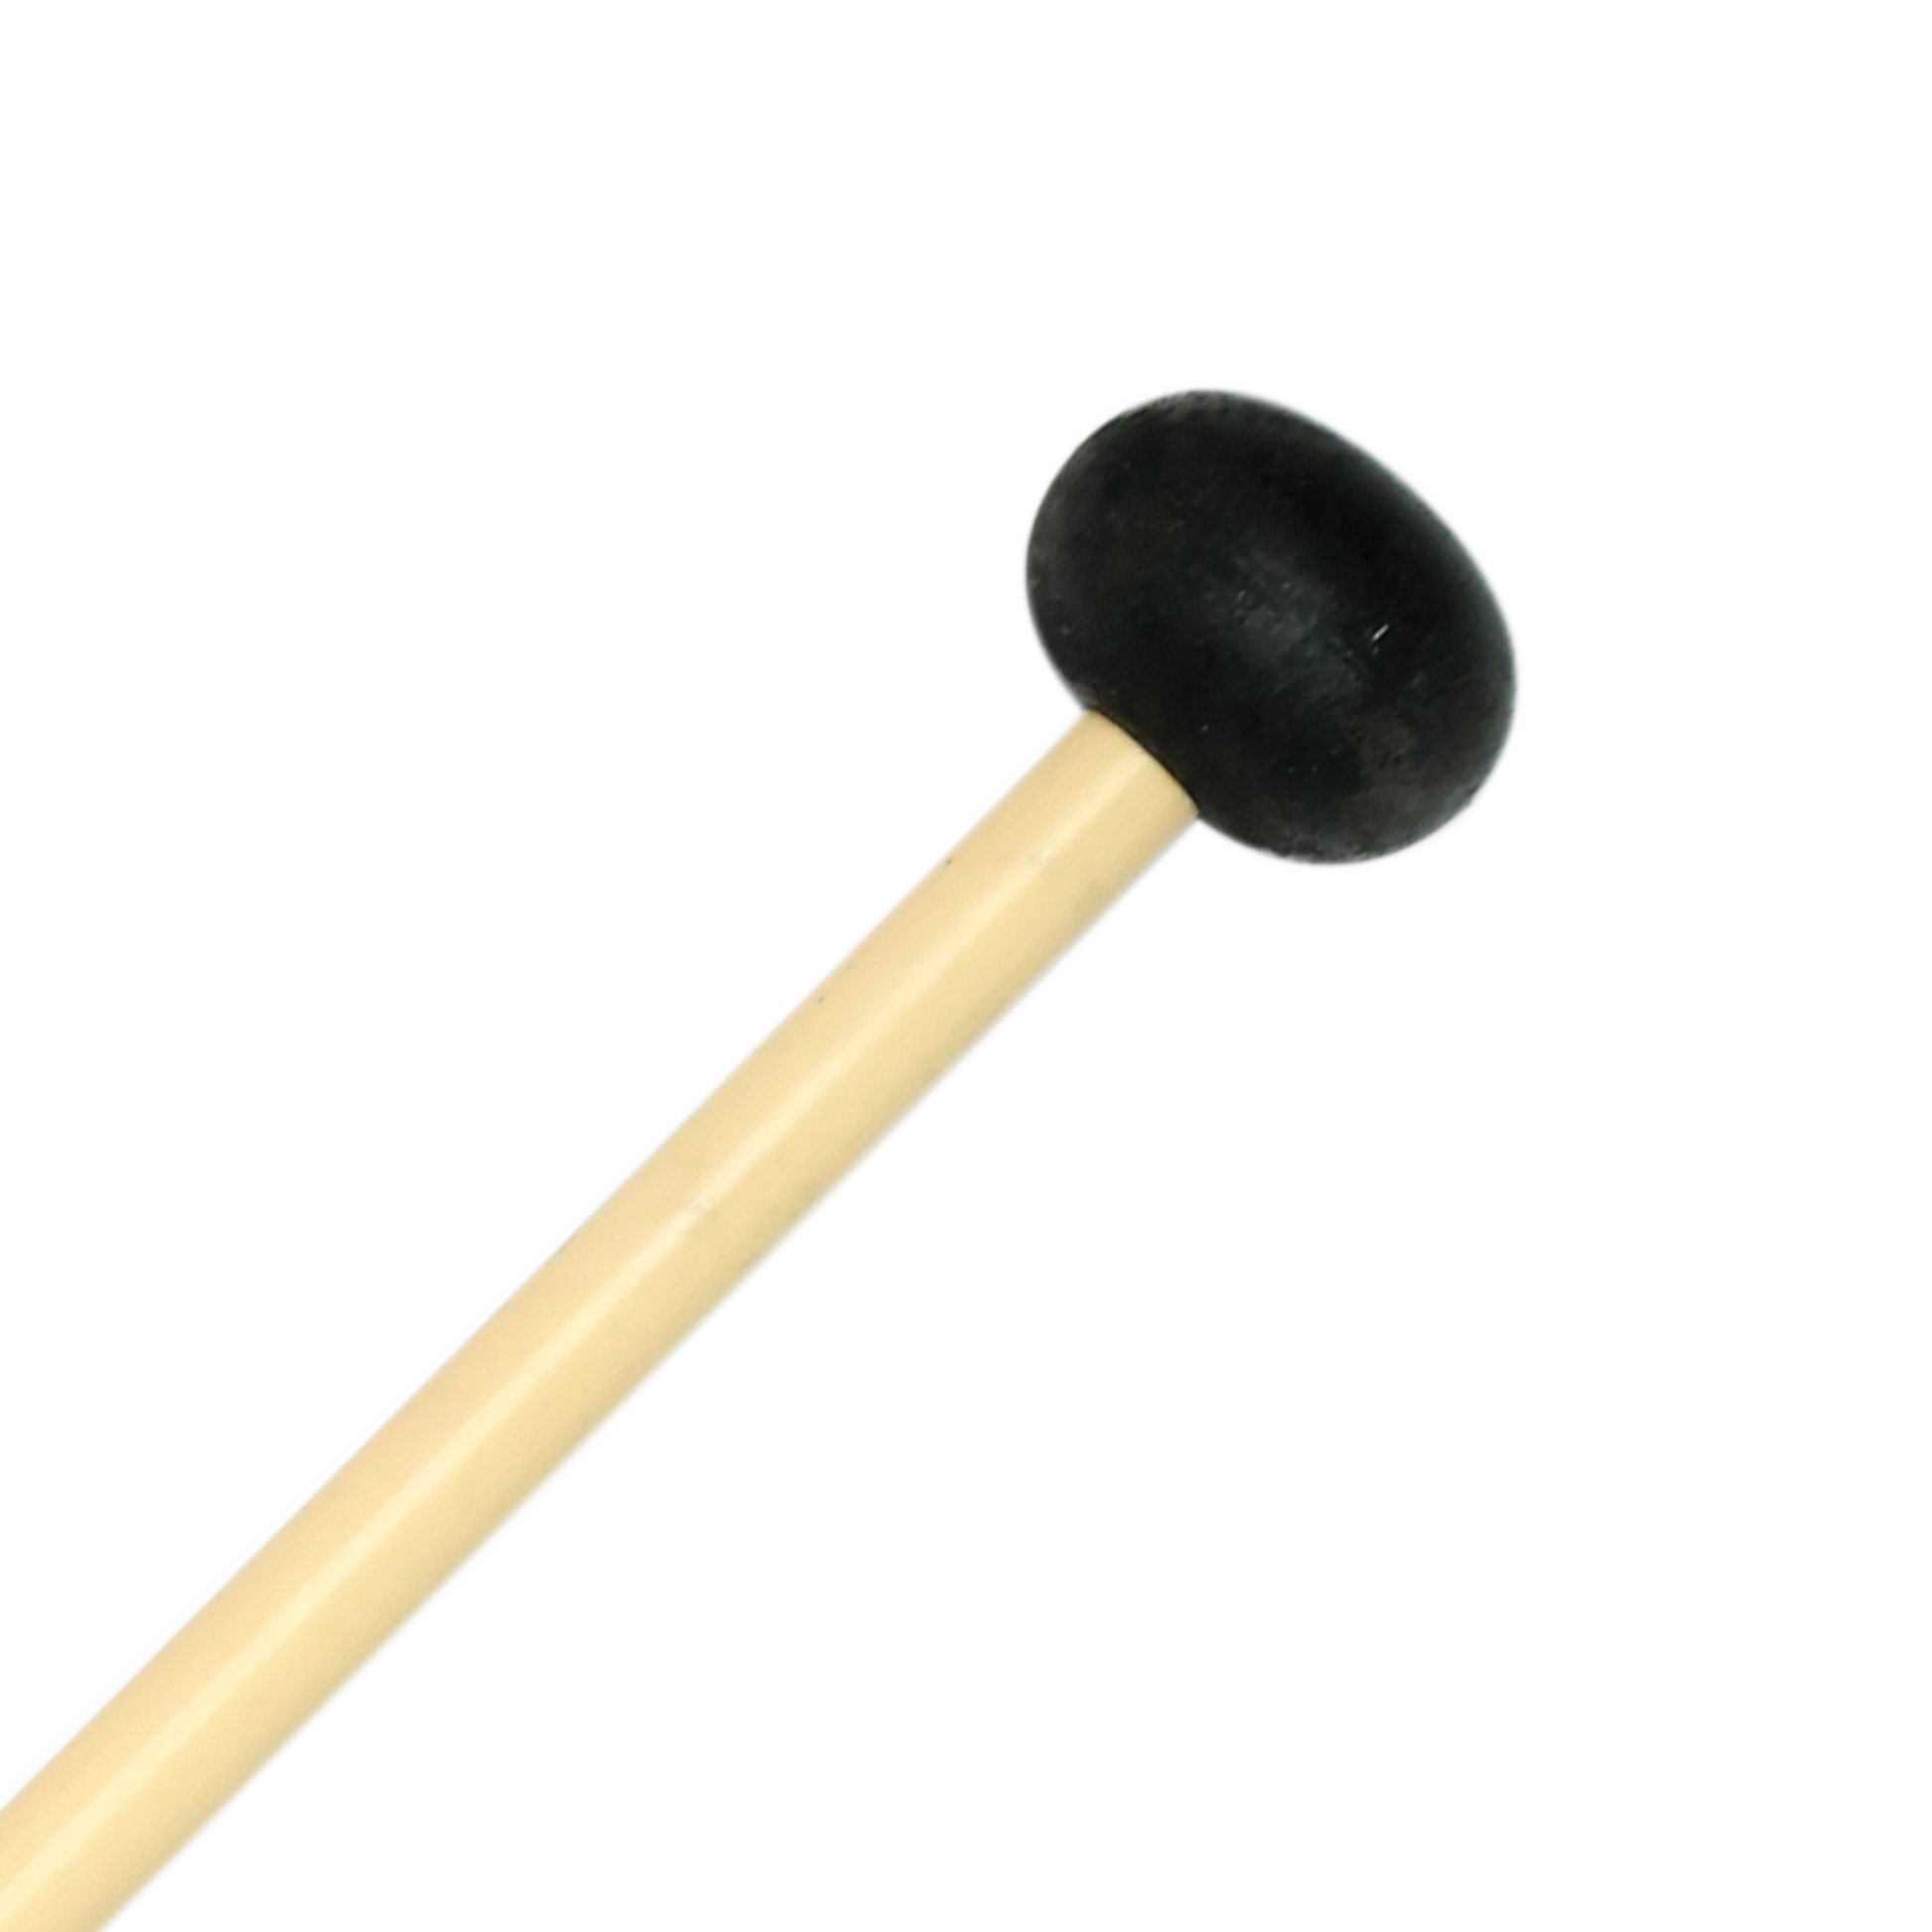 1 Pair Rubber Mallet Percussion Xylophone Bell Mallets Glockenspiel sticks  Mallet with Wooden Handle Rubber Mallet Percussion Instrument Black